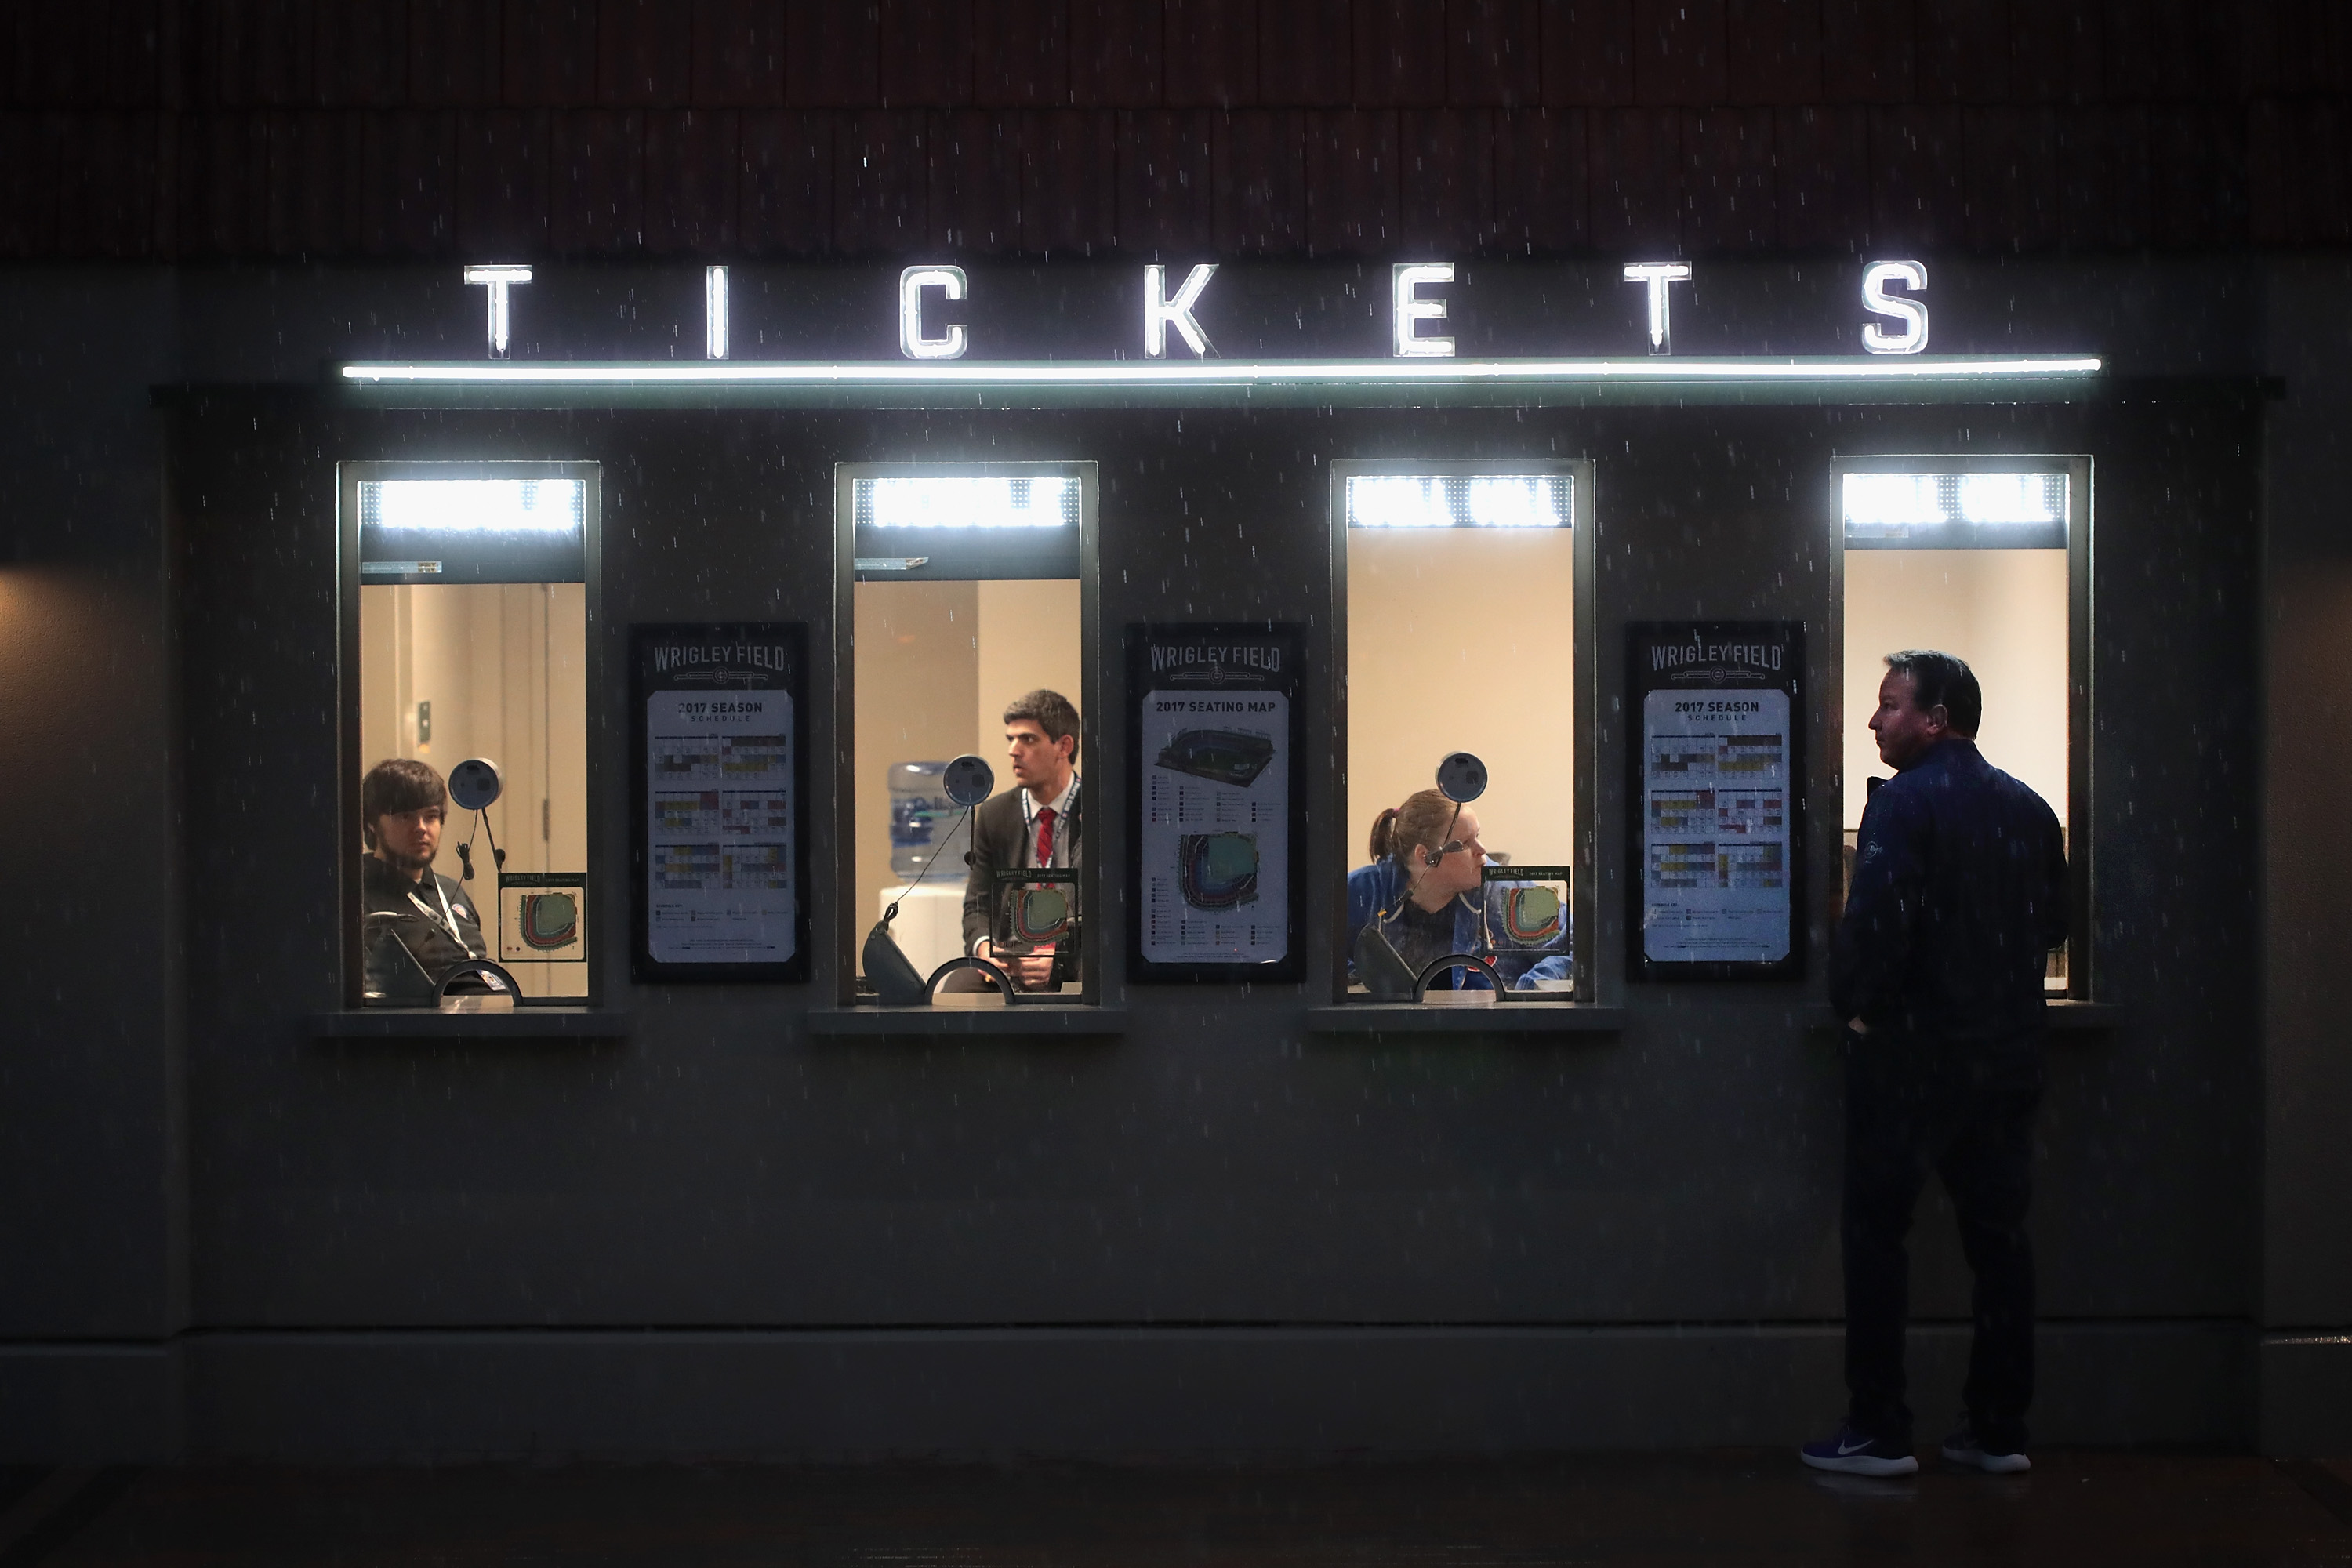 CHICAGO, IL - APRIL 10:  A fan stands at the ticket window in the rain outside of Wrigley Field before the start of the 2017 home opener against the Los Angeles Dodgers on April 10, 2017 in Chicago, Illinois. The Cubs defeated the Cleveland Indians in seven games to win the 2016 World Series.  (Photo by Scott Olson/Getty Images)